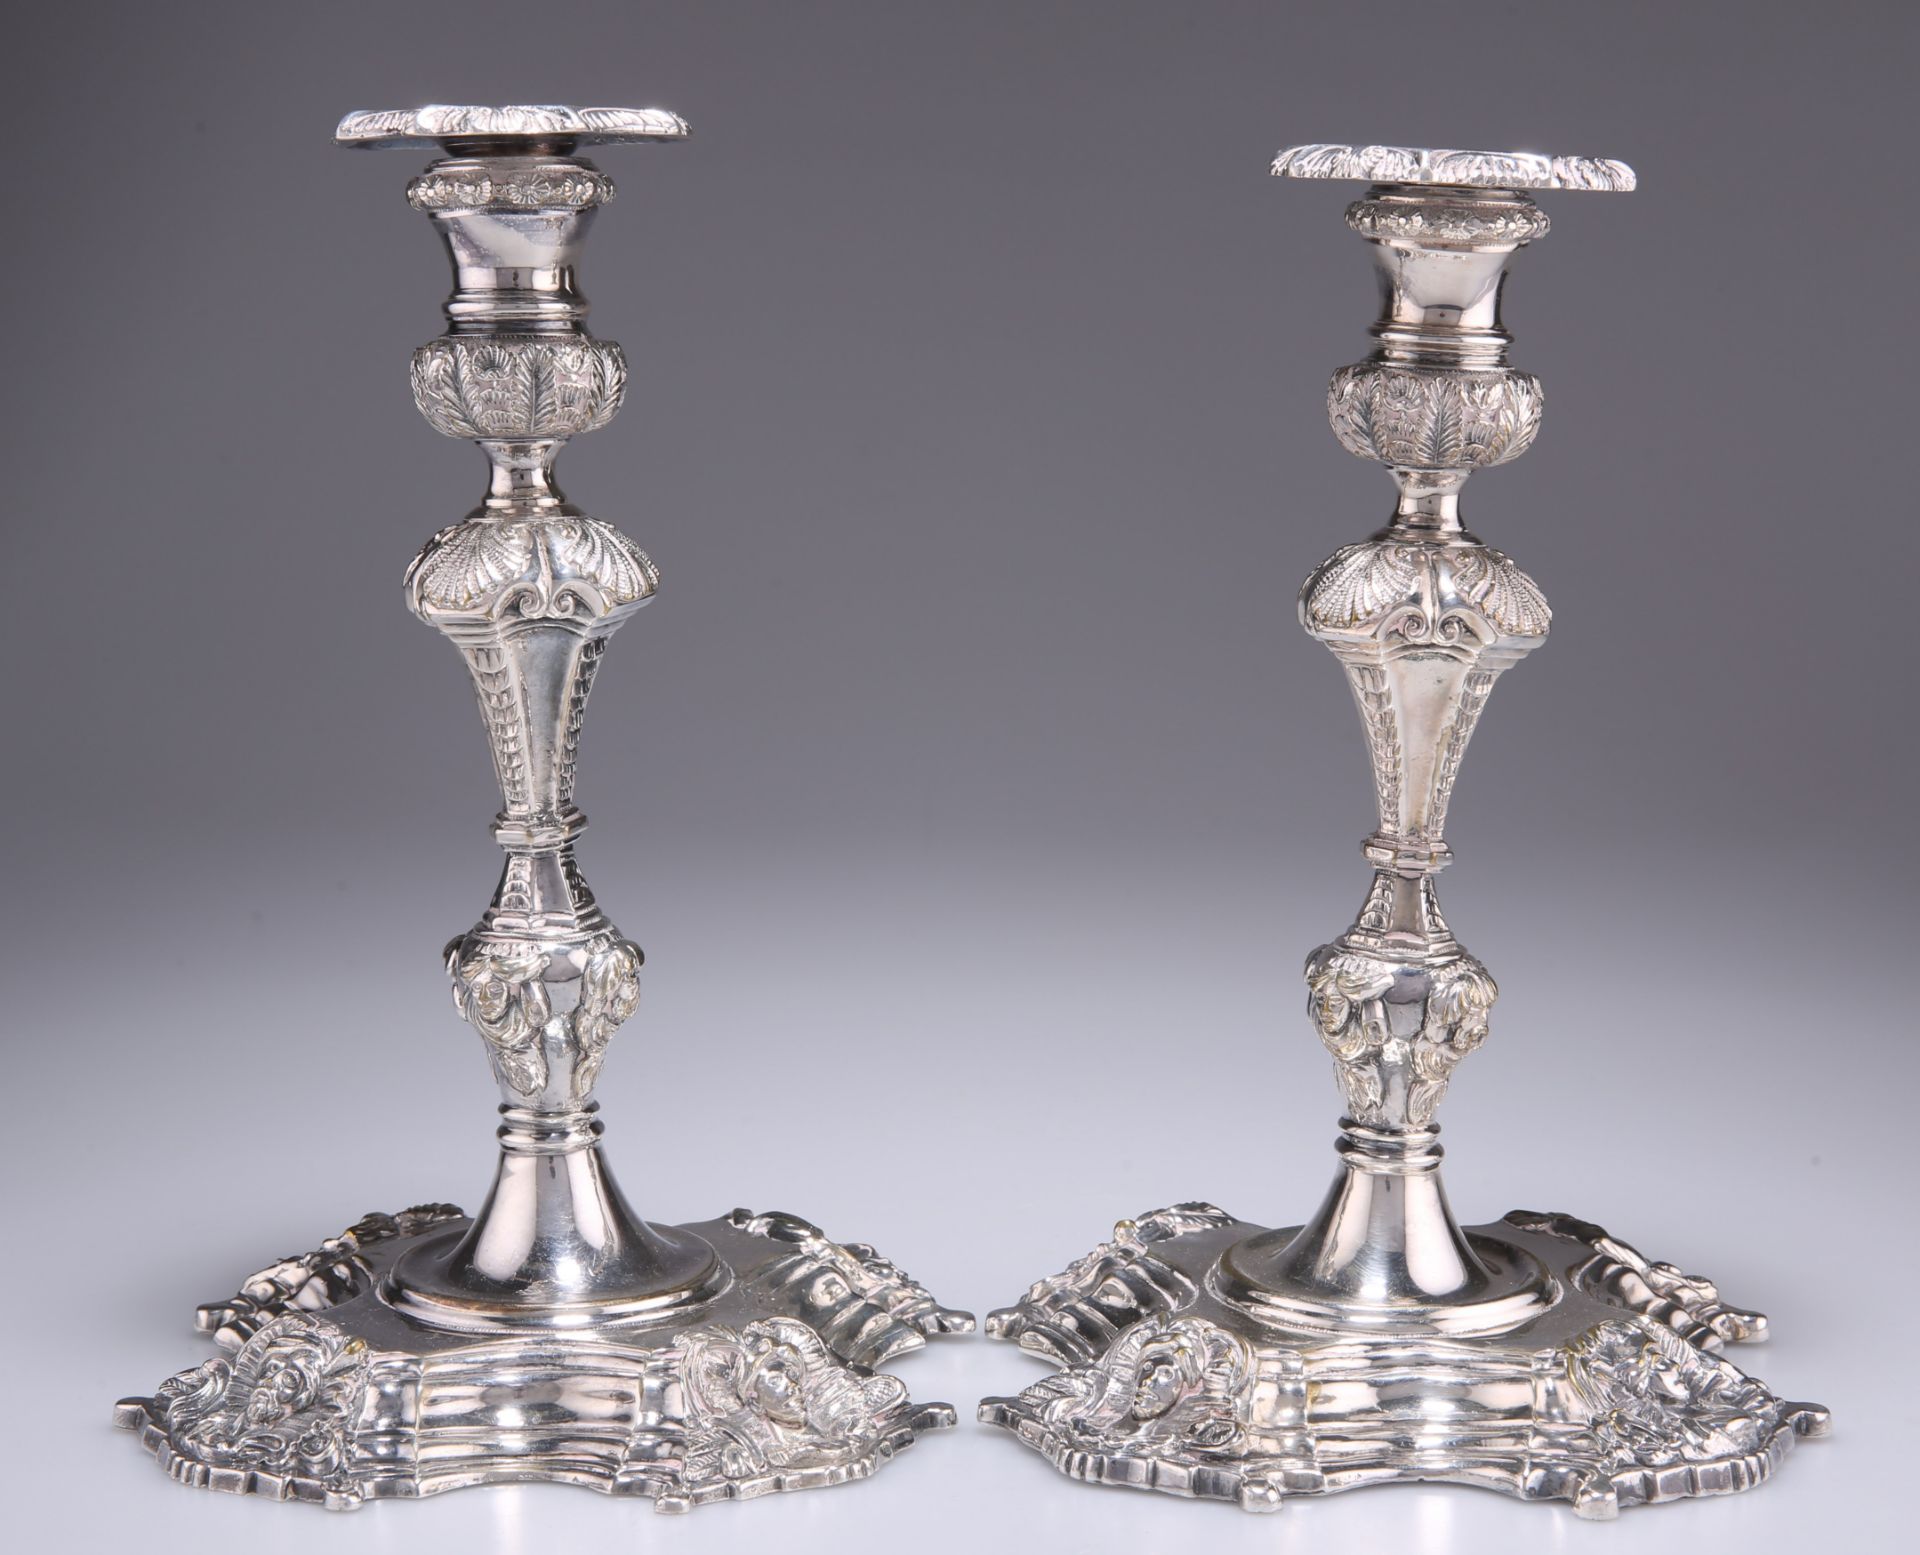 A PAIR OF BAROQUE REVIVAL SILVER-PLATED CANDLESTICKS